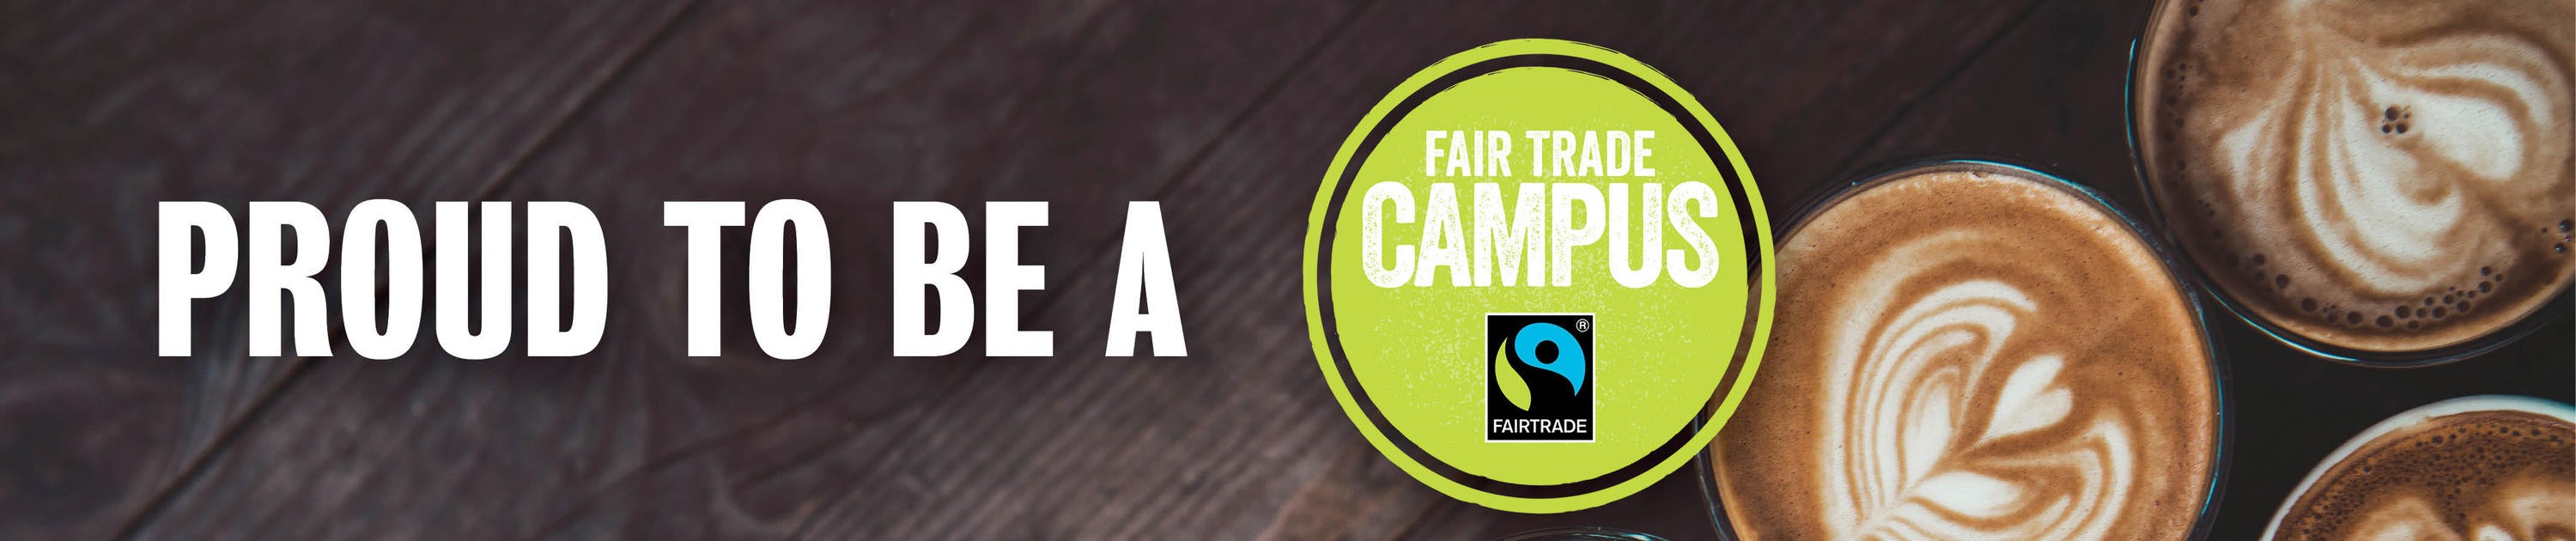 Proud to be a Fair Trade Campus banner image